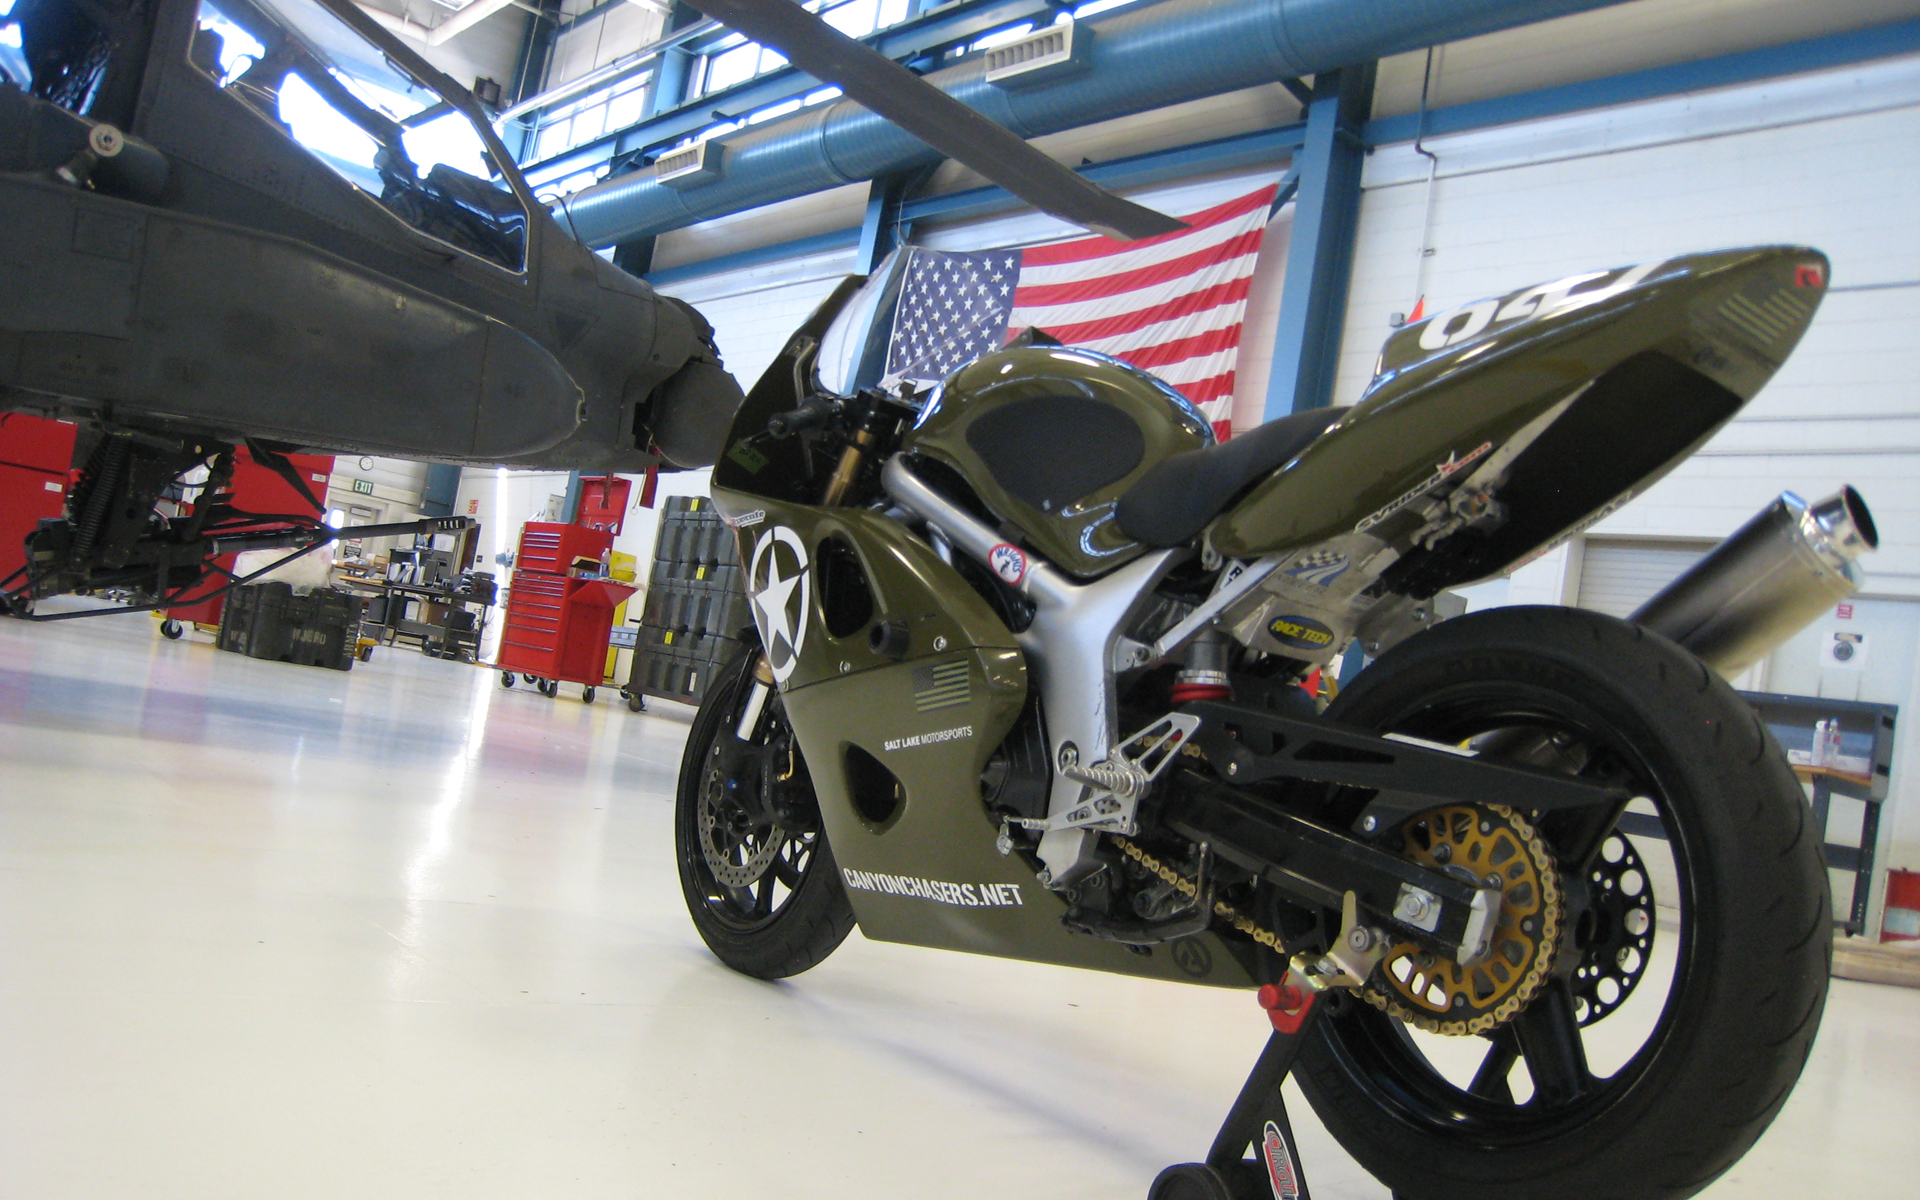 SV650 Race Motorcycle with Apache by canyonchaser